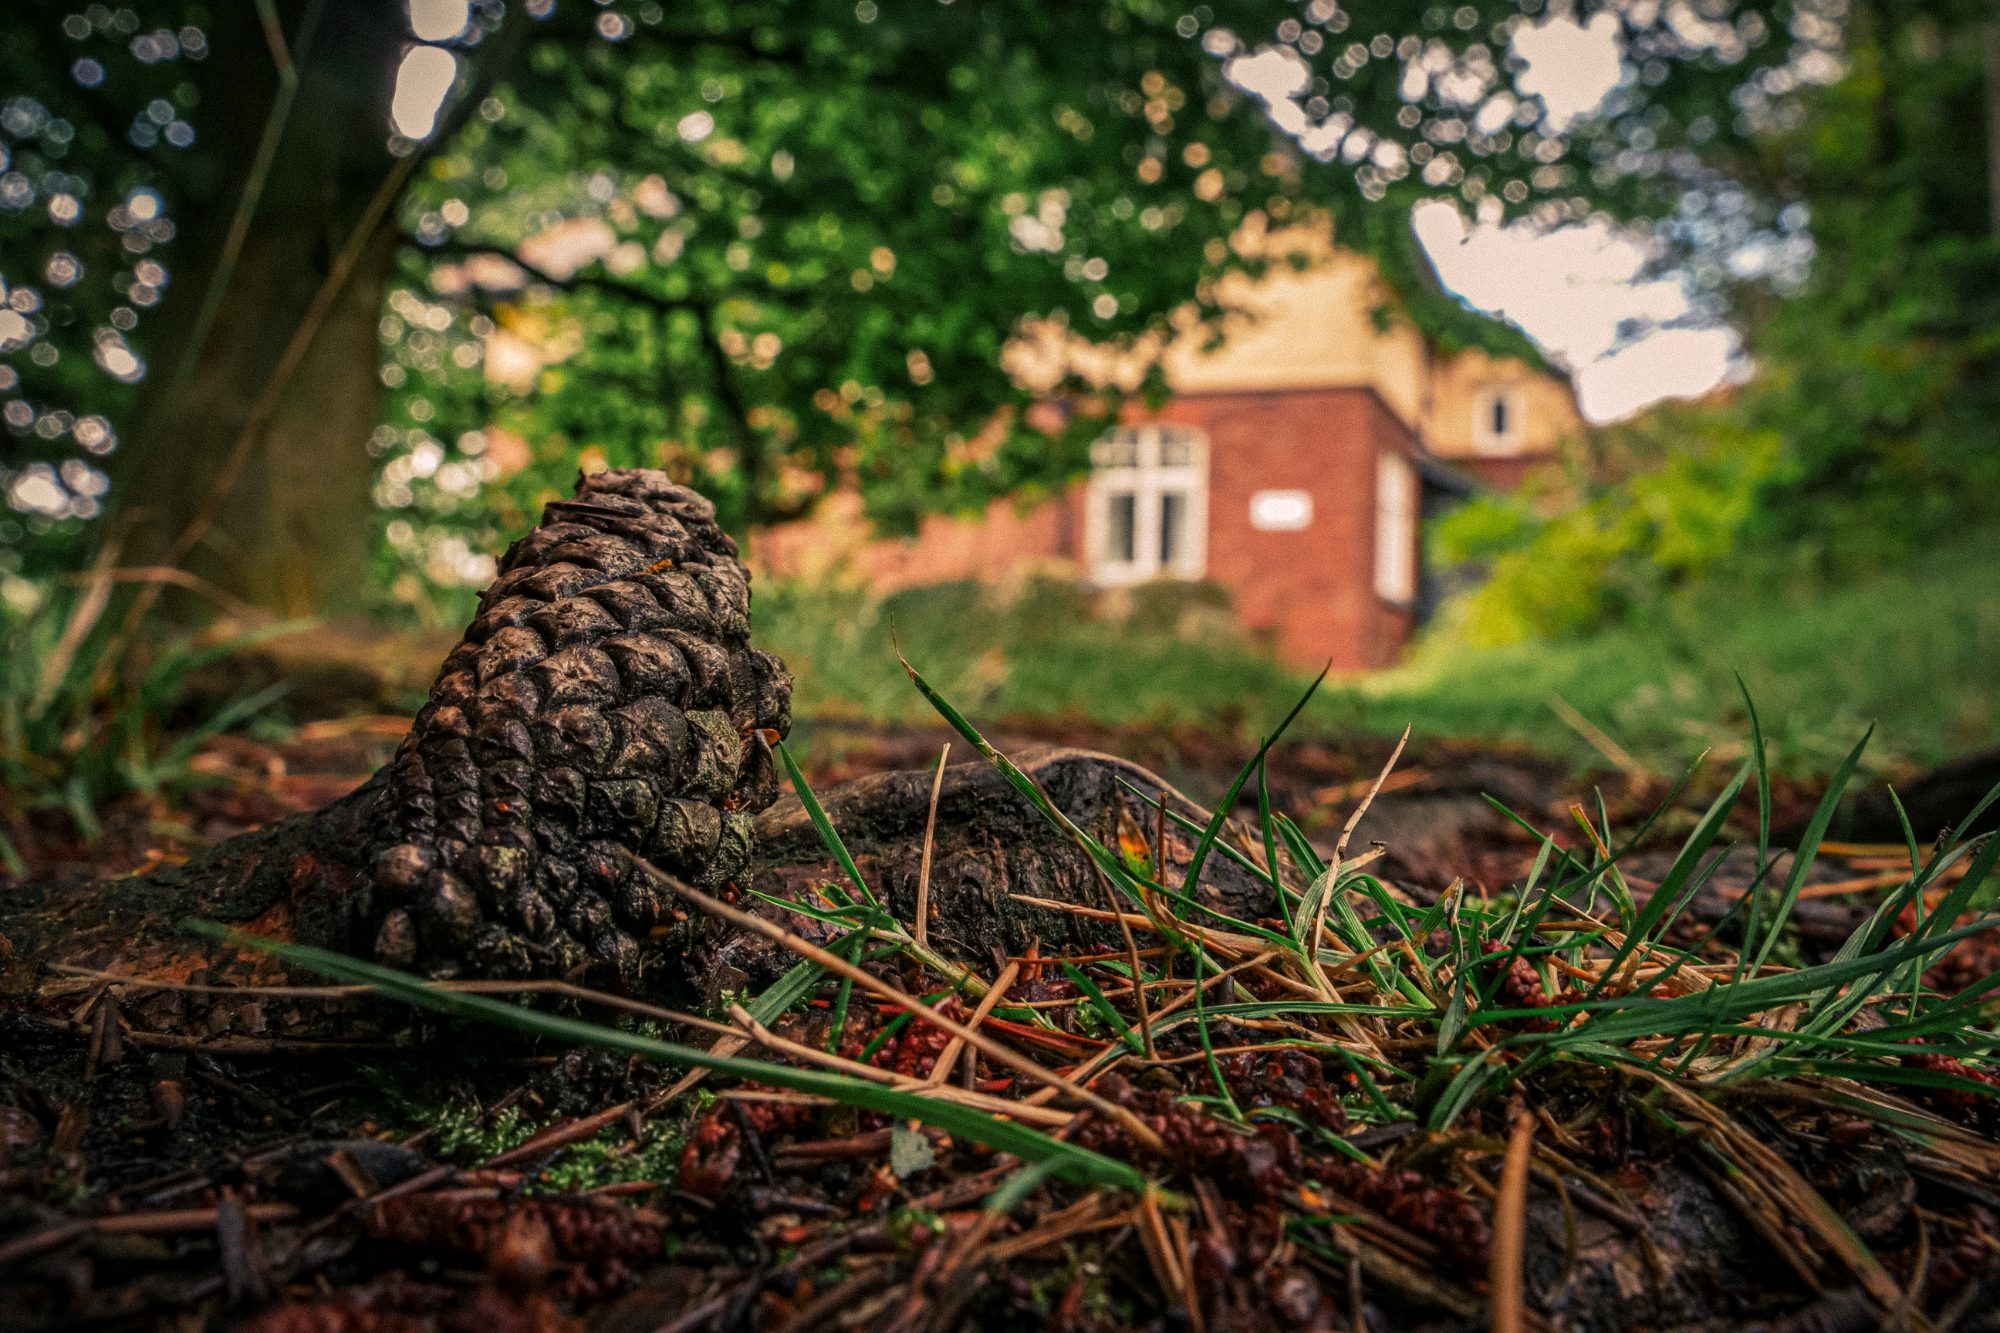 Close up of a pinecone in hostel grounds